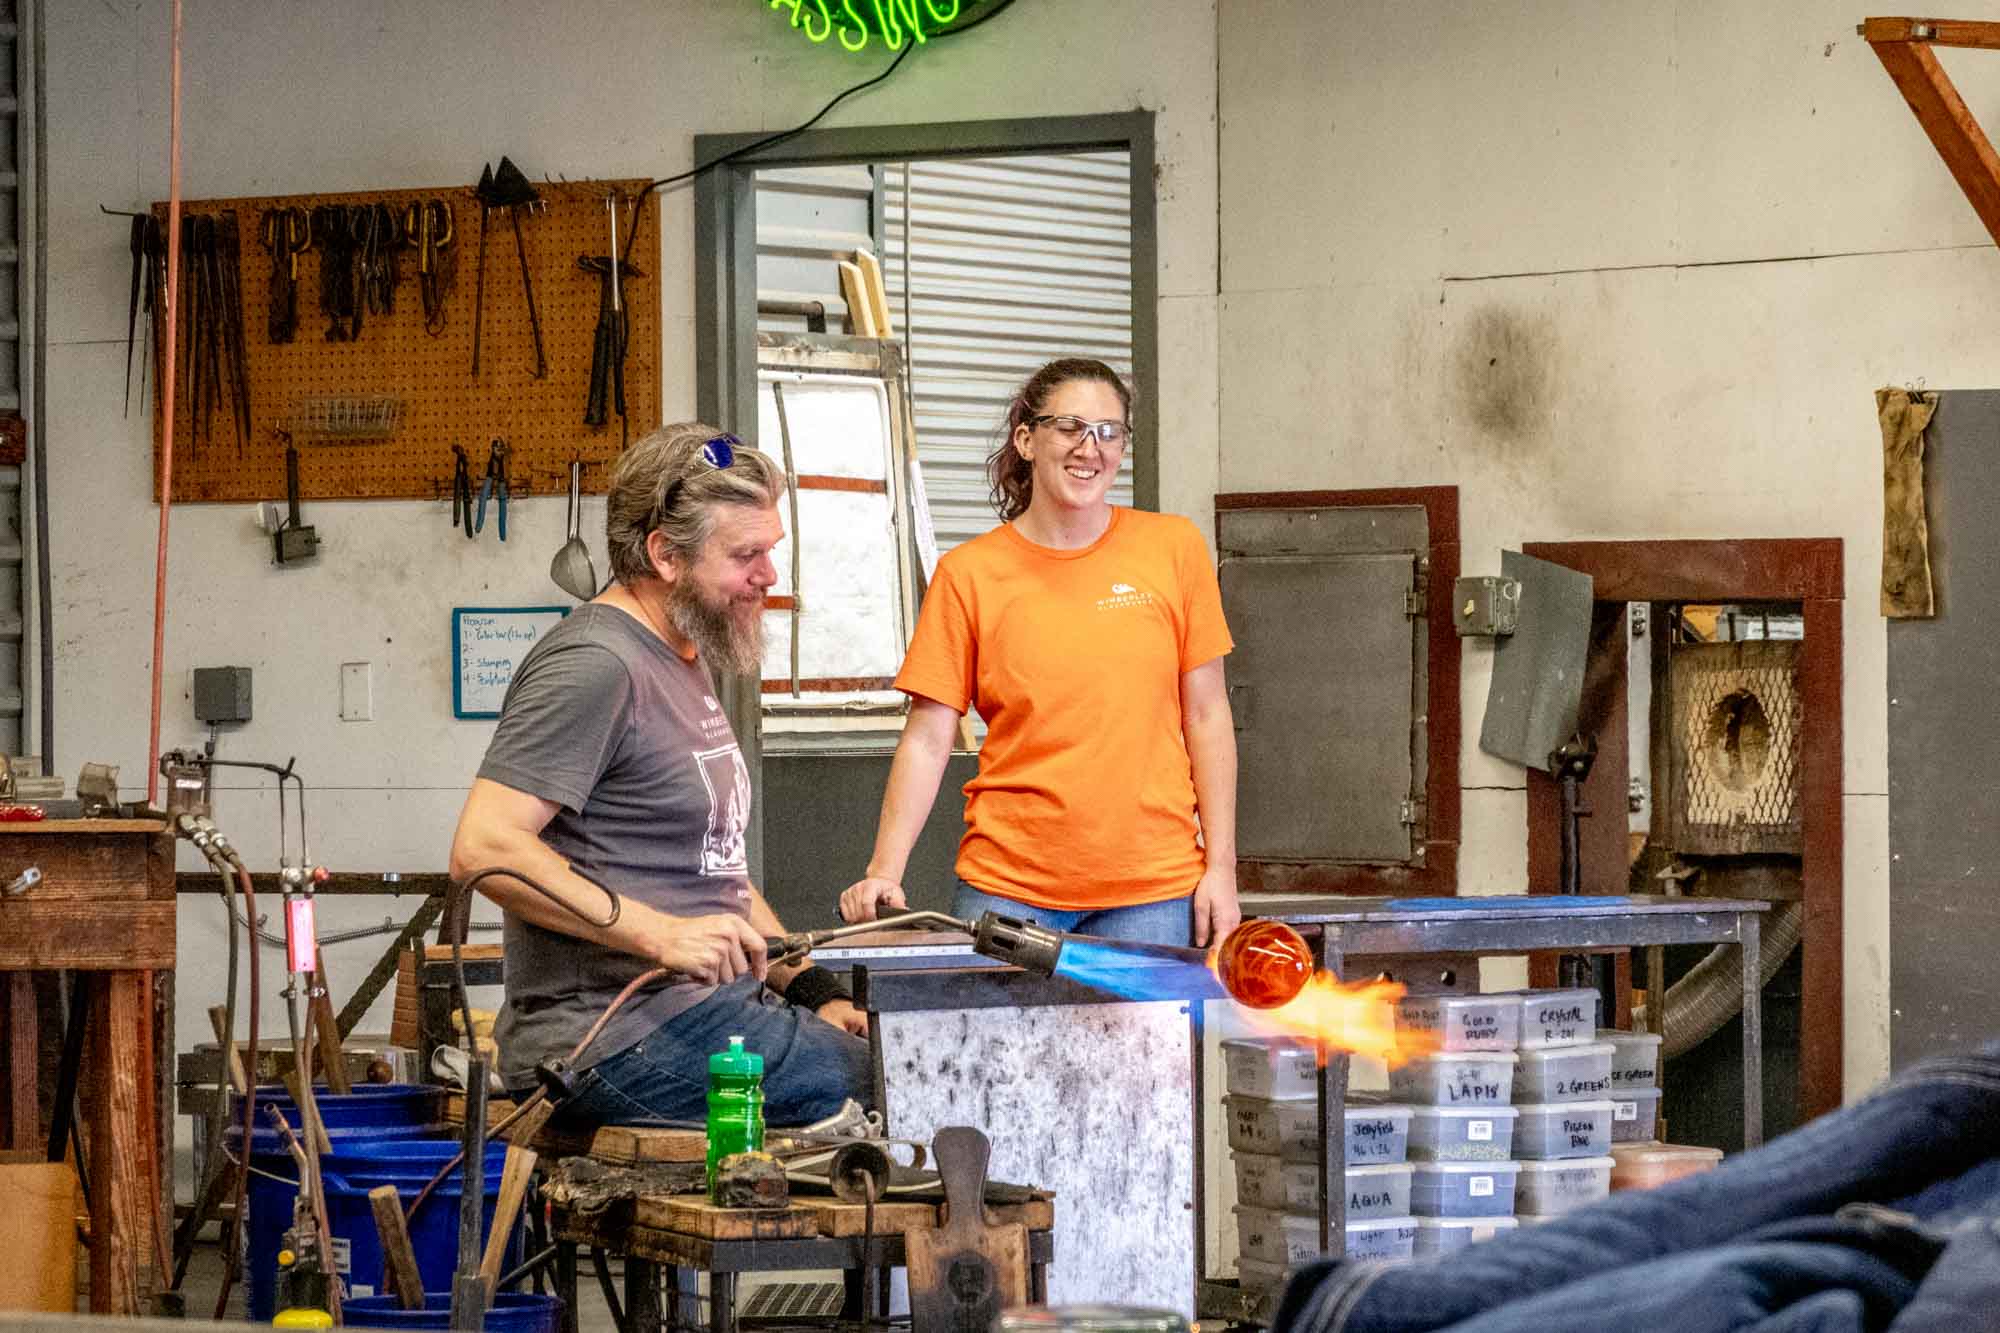 People in a glassblowing workshop using a blowtorch on a piece of molten glass.